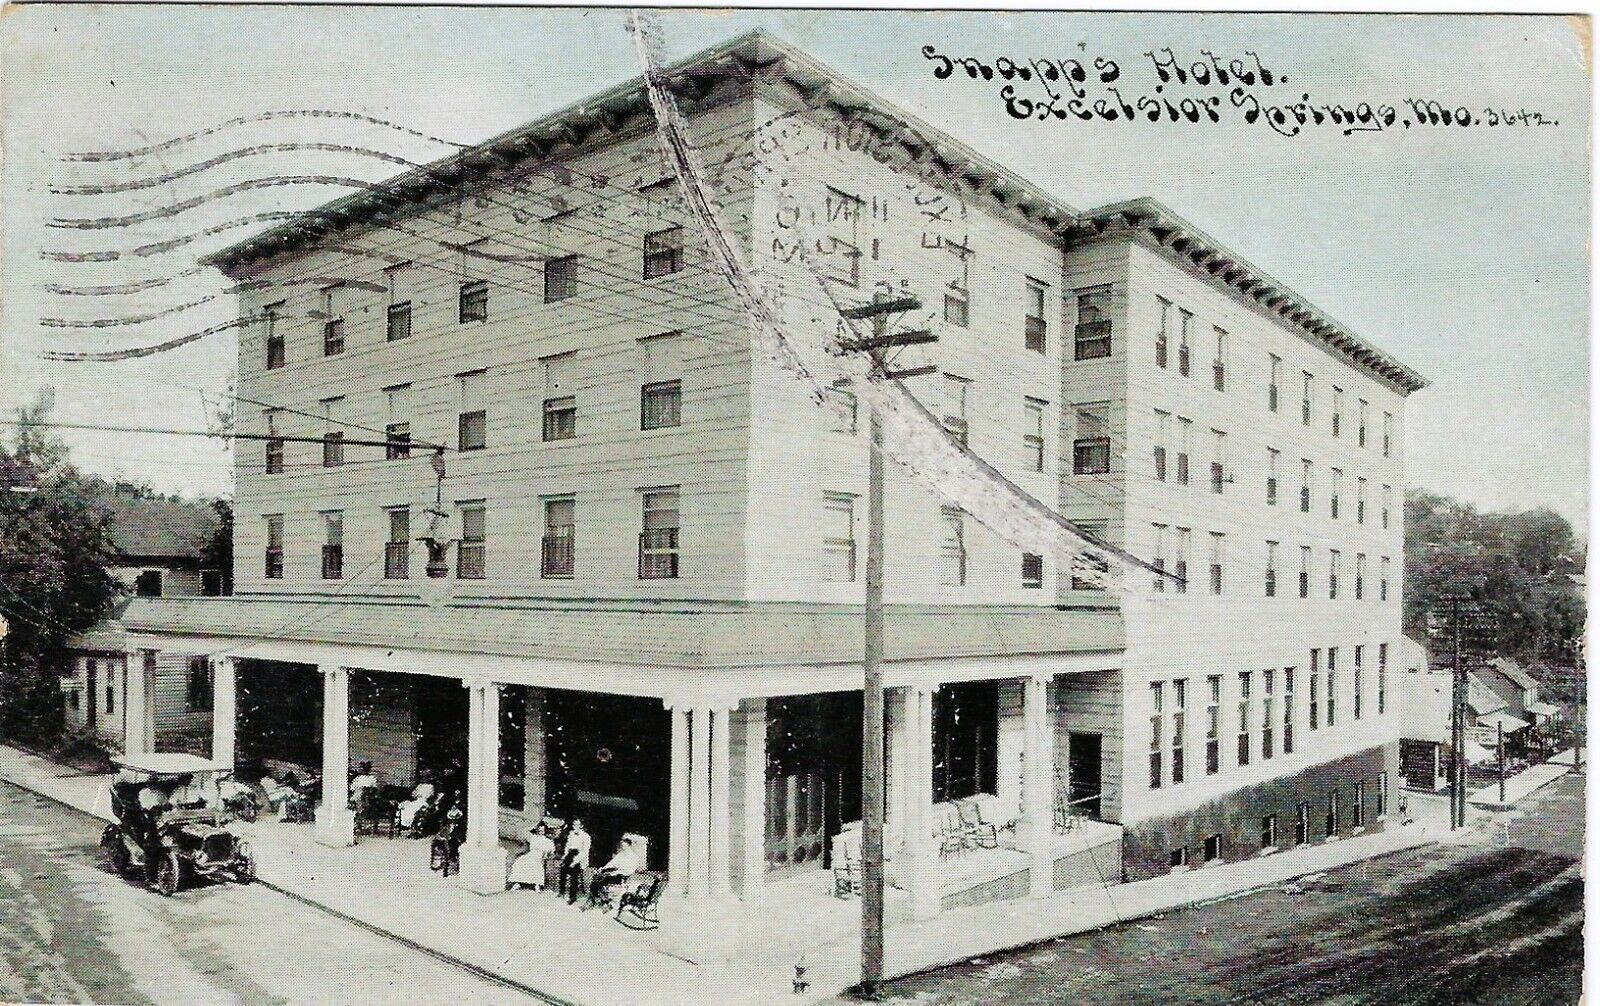 Excelsior Springs MO Snapp's Hotel 1911